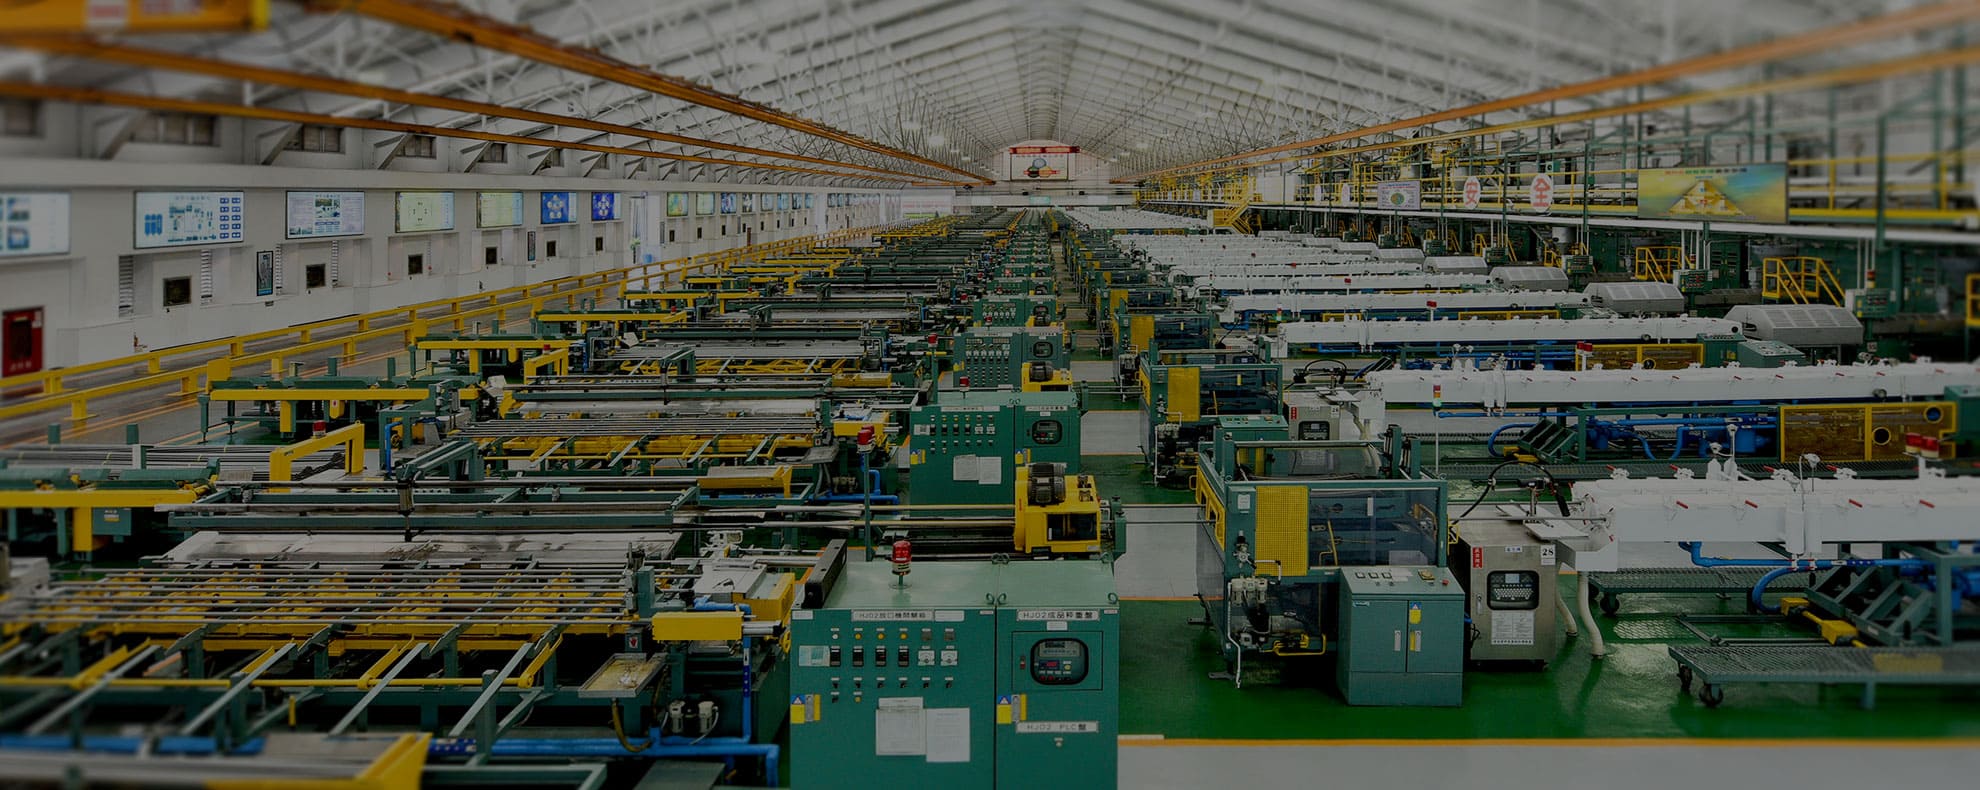 The most well-known PVC fitting and plastic pipe supplier and PVC pipe manufacturer in Taiwan, successfully established the most enormous and profitable plastic pipe factory (PVC pipe plant) called Chiayi First Plant.